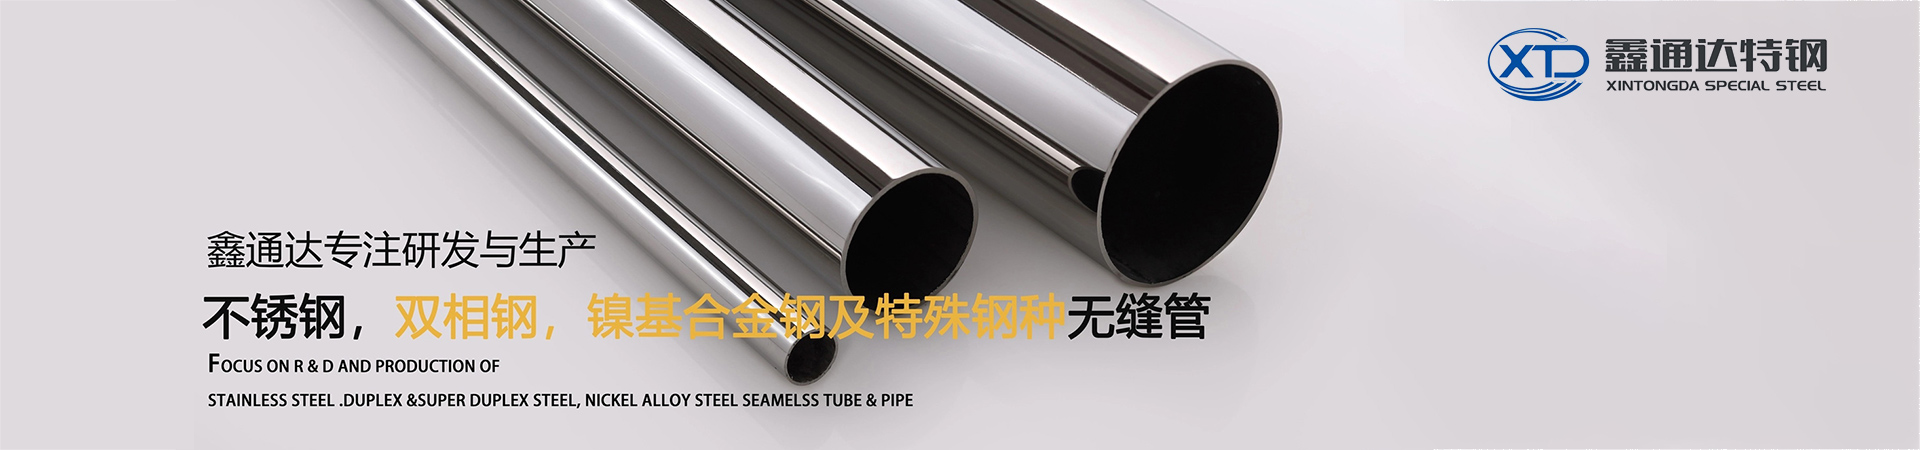 Manufacture of stainless steel ,duplex & super duplex stainless,Nickel Alloy steel pipe and tube.Incoloy ,Hastelloy ,Monel ,Hastelloy seamless tube and pipe.